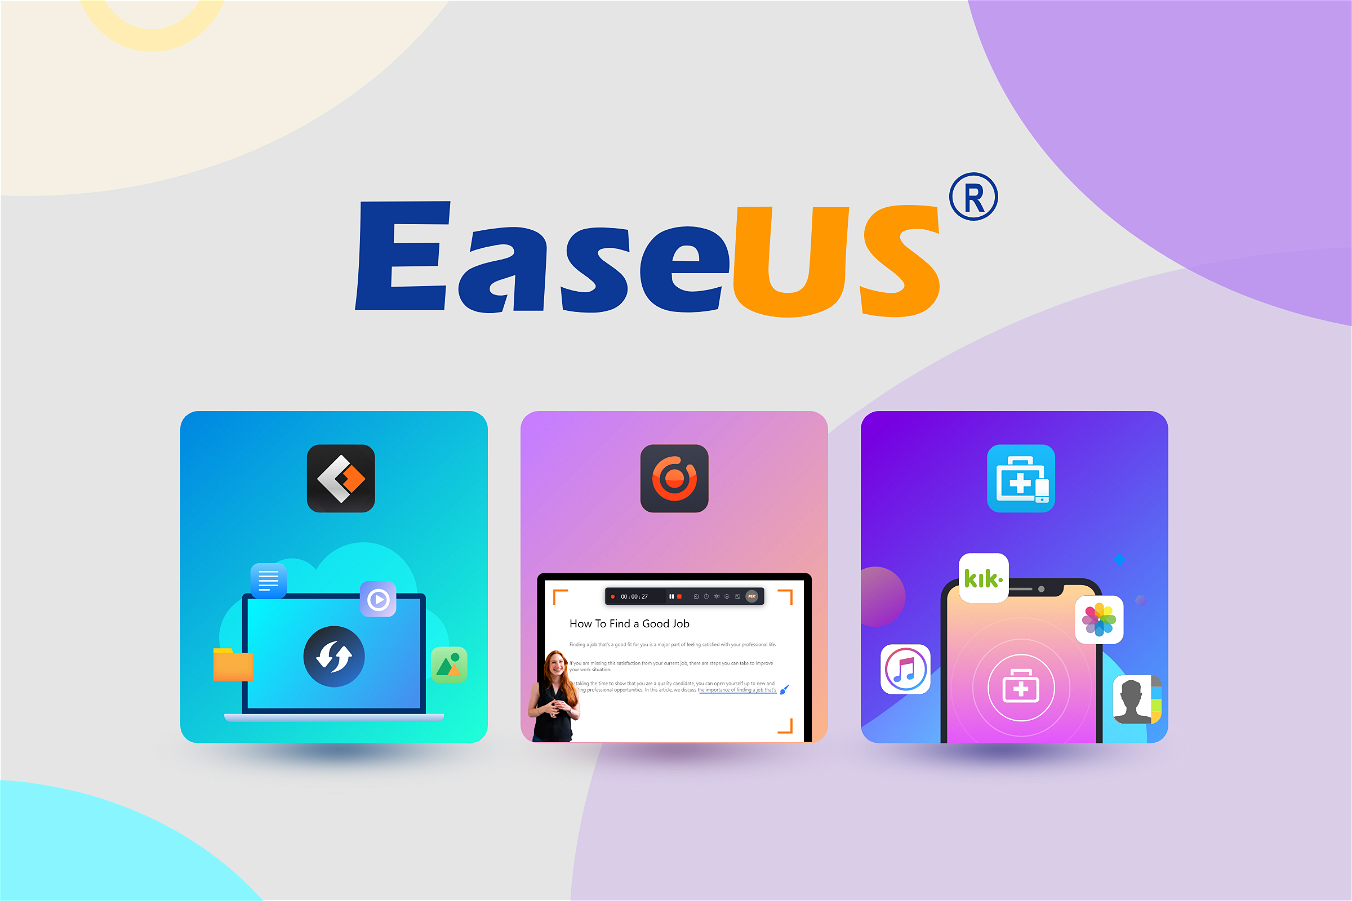 EaseUS Software Lifetime Deal-Pay Once & Never Again